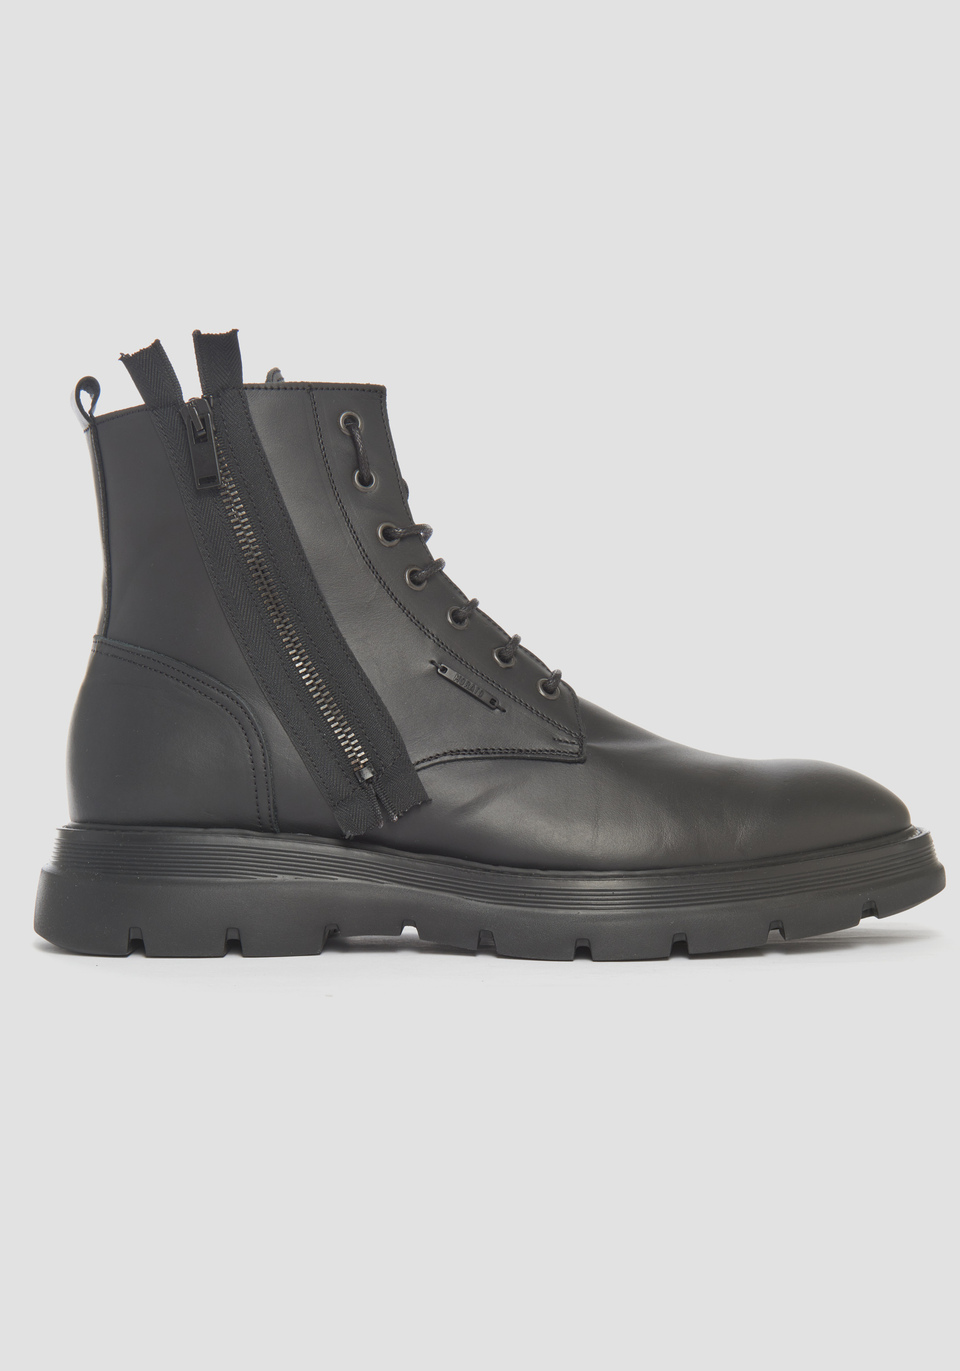 DODGE LEATHER BOOTS WITH SIDE ZIP - Antony Morato Online Shop